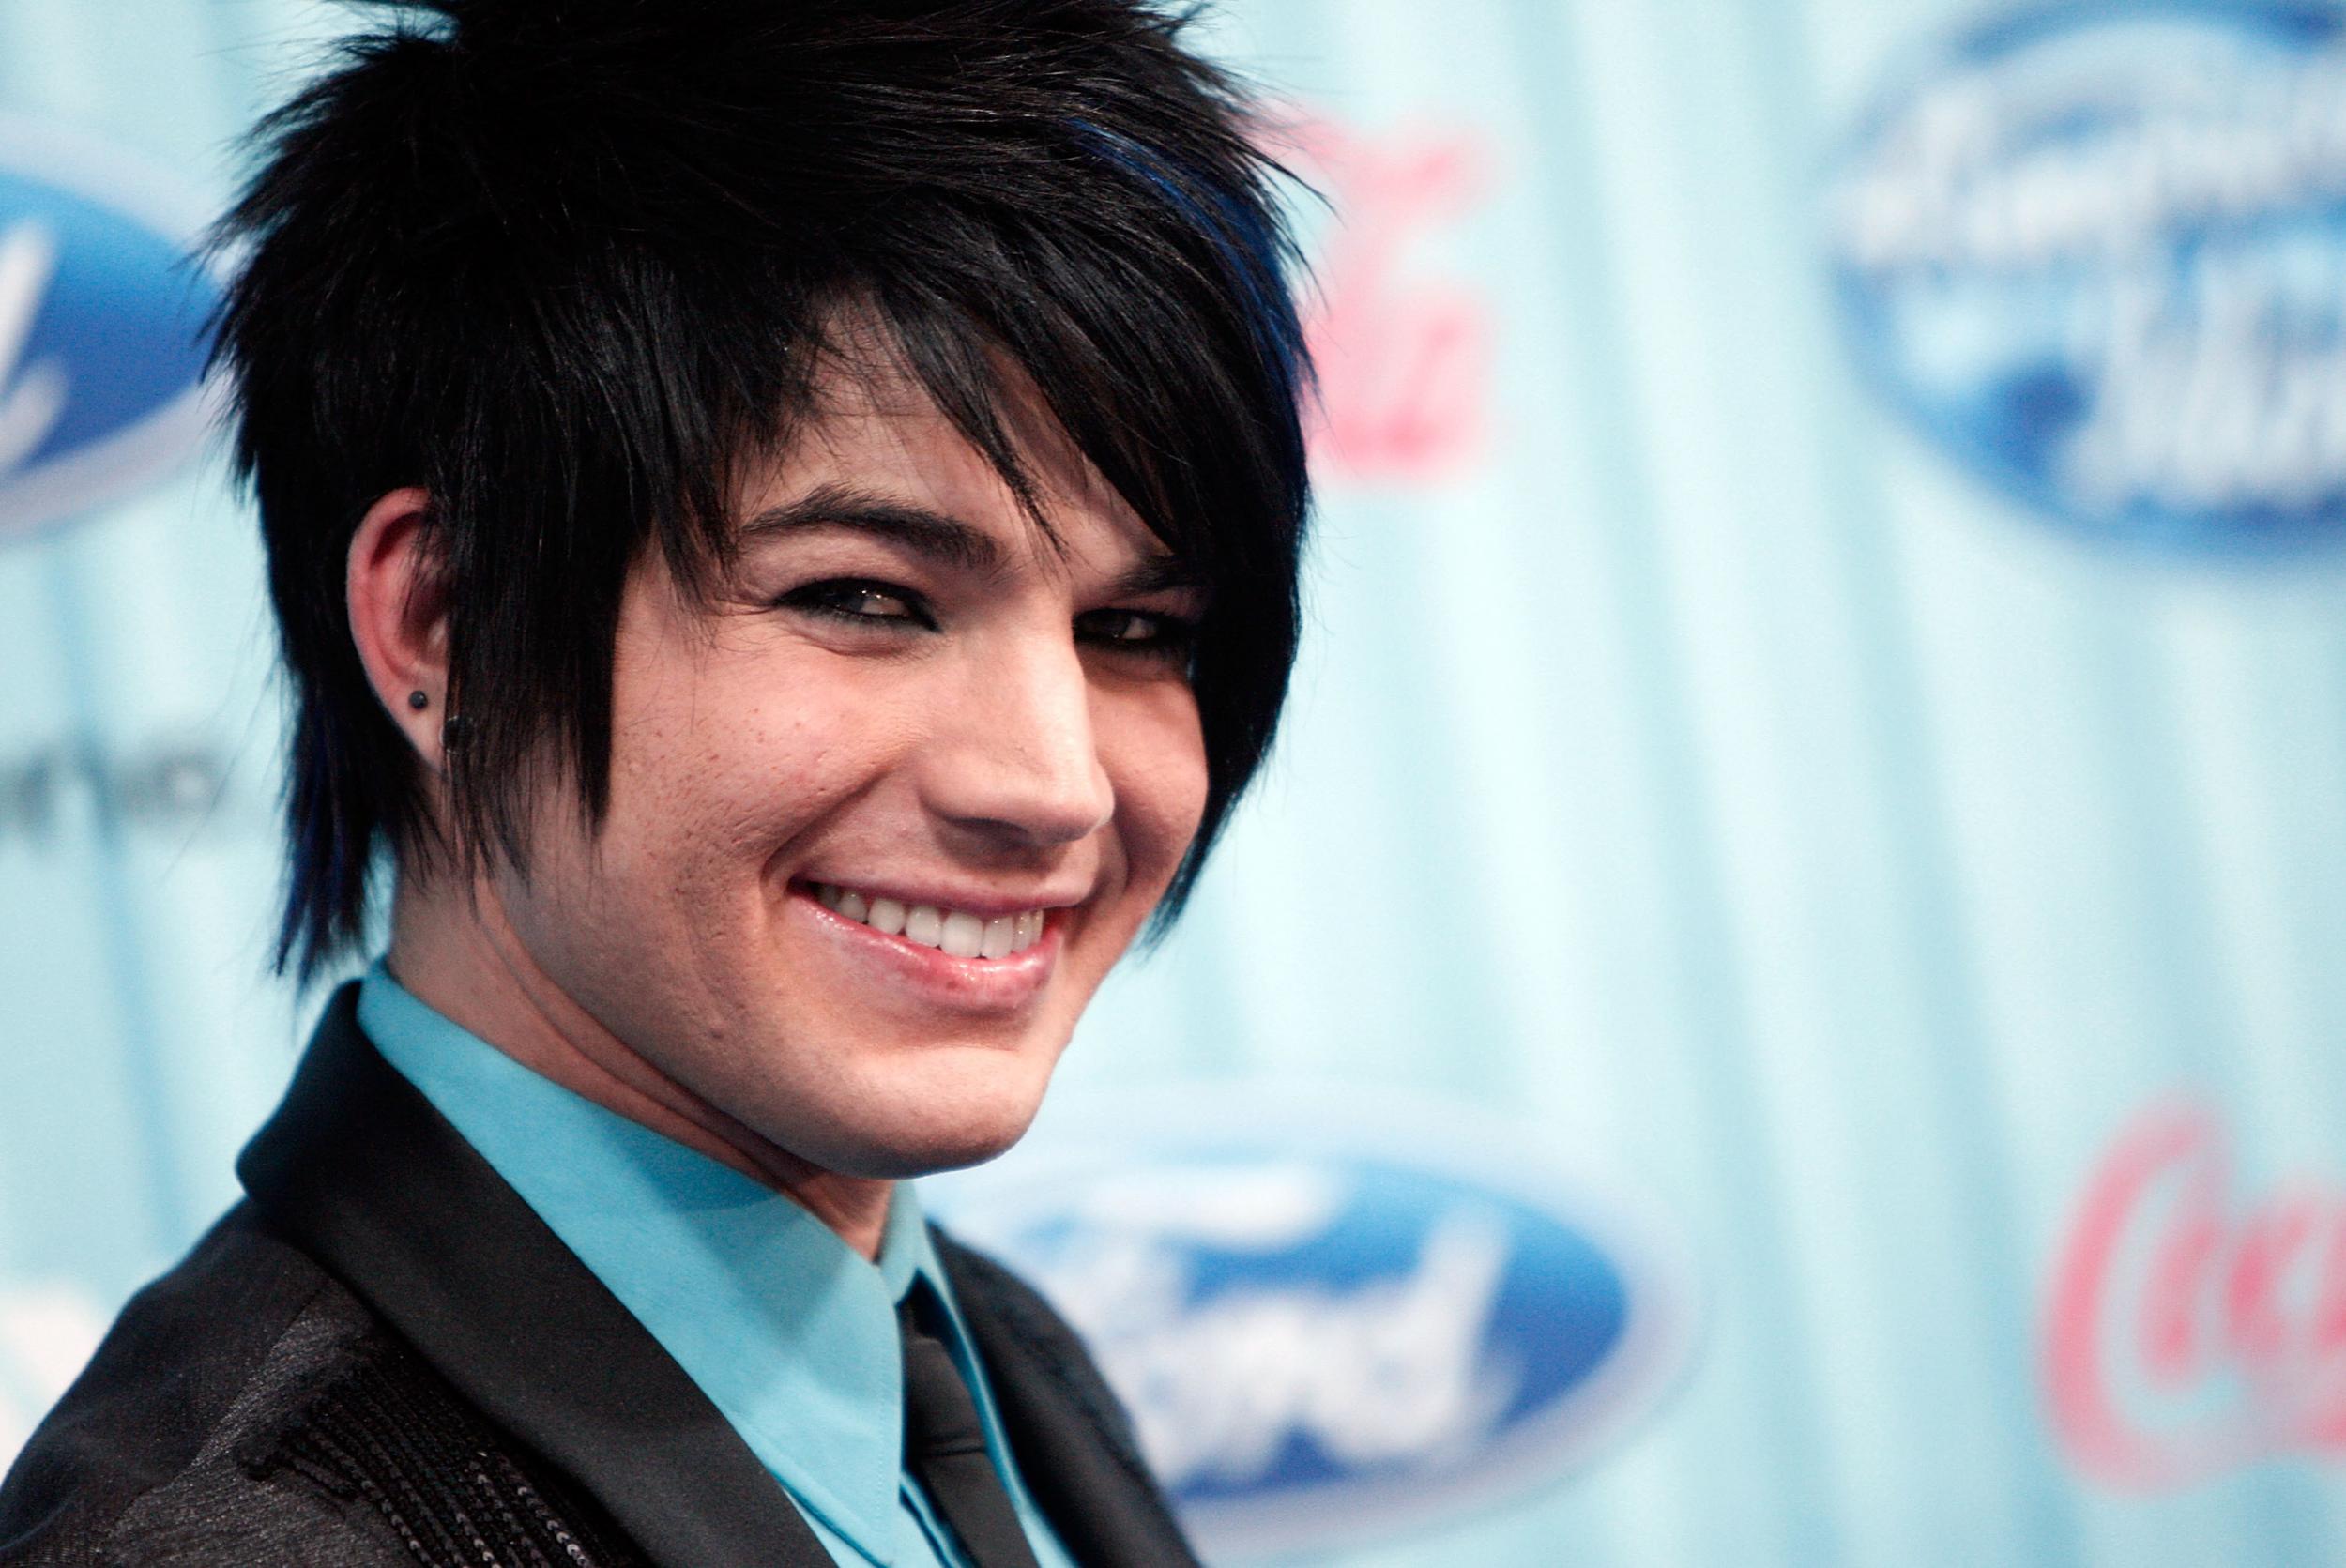 Lambert after emerging as the runner-up in American Idol in 2009